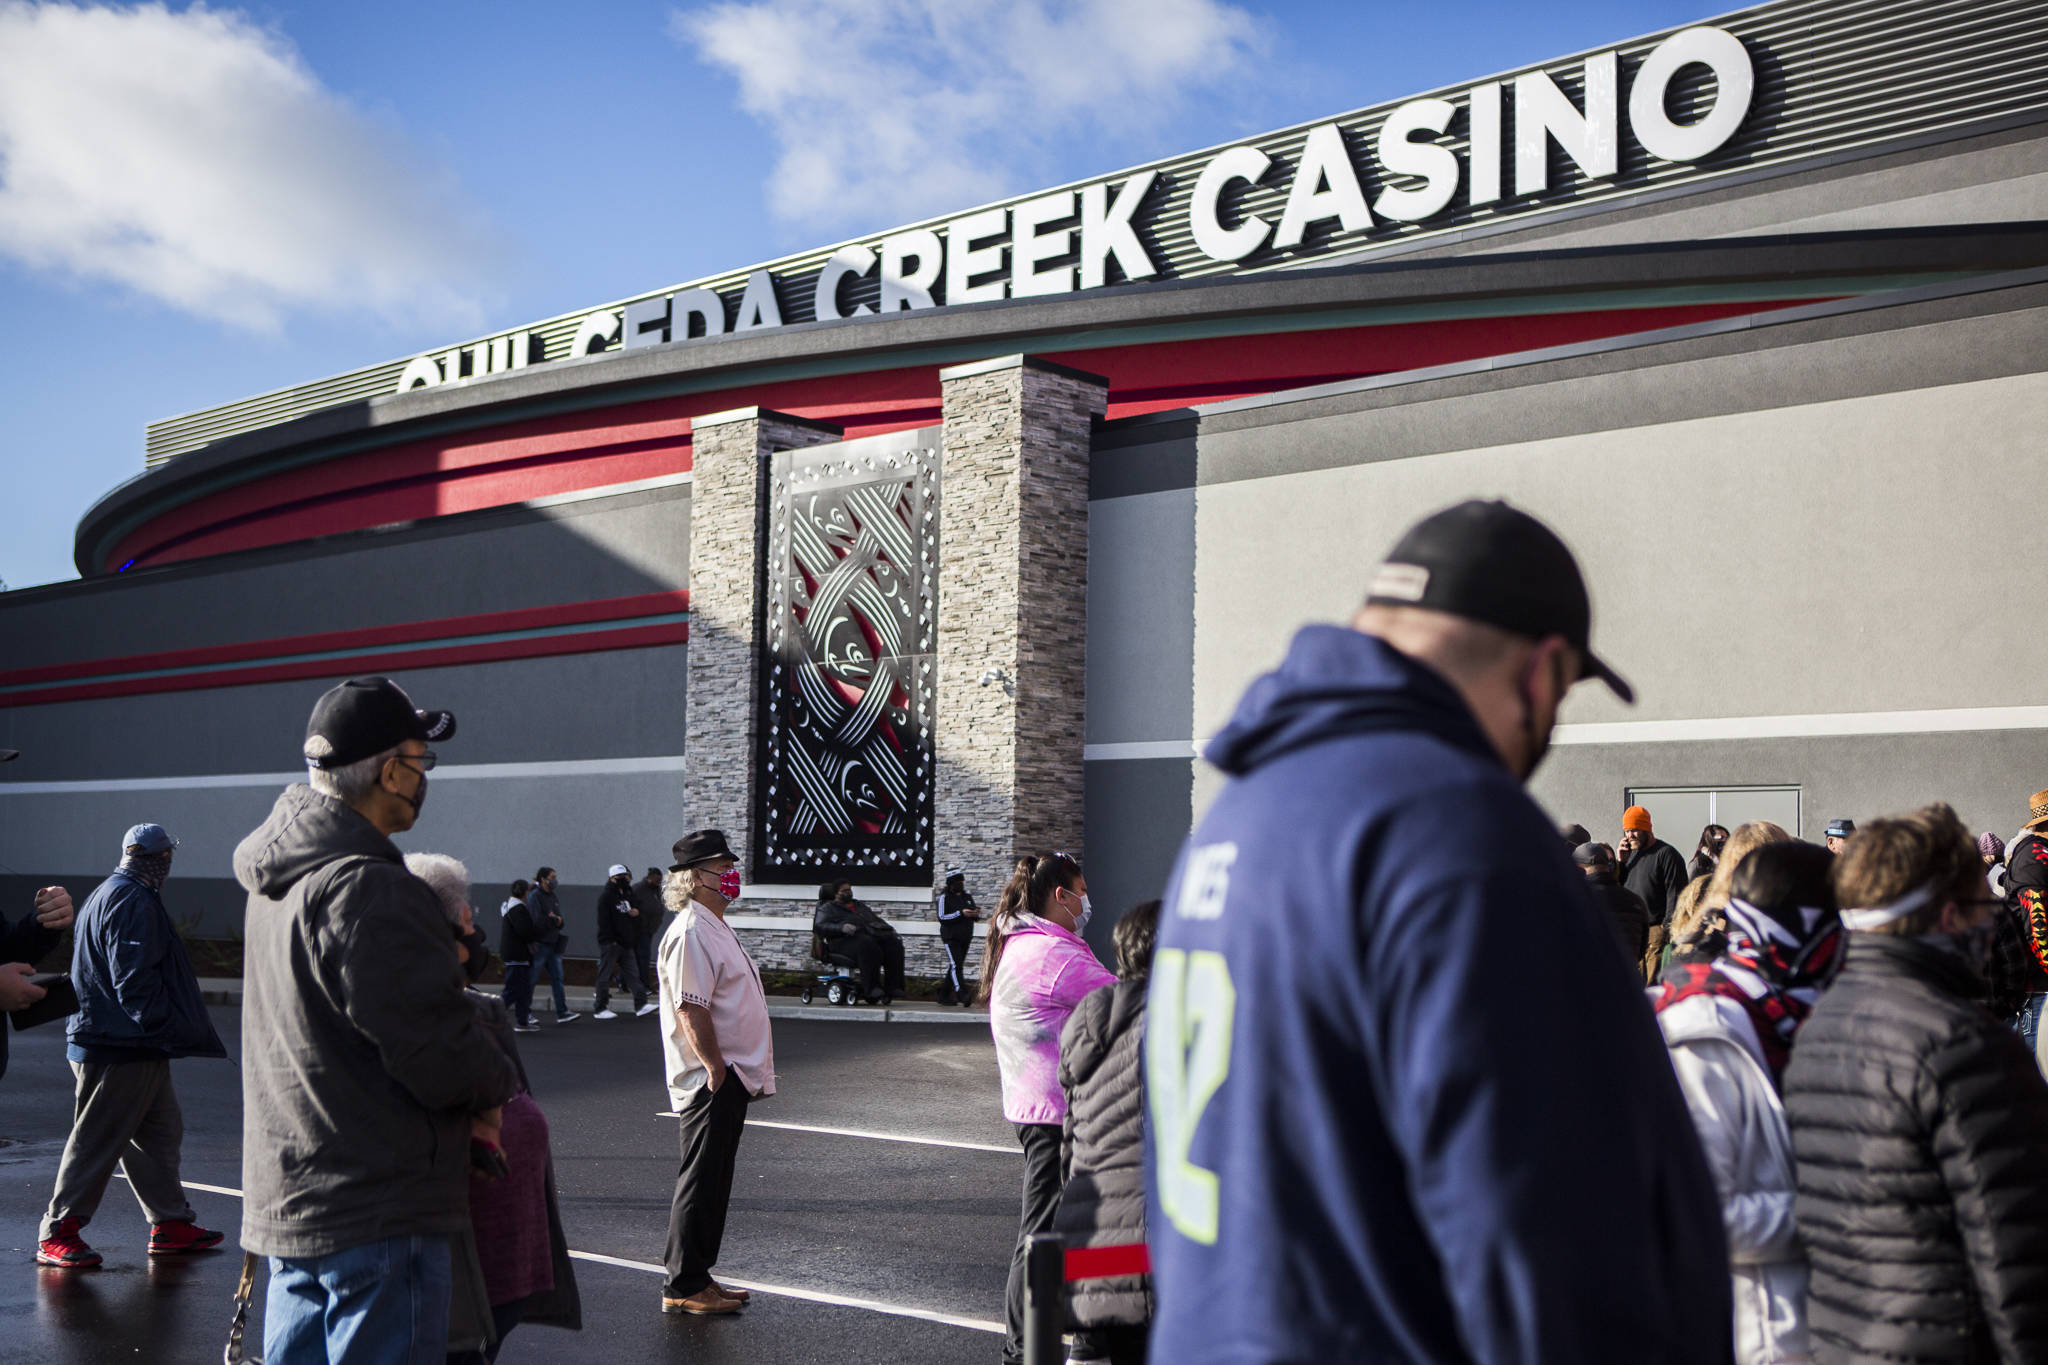 People gather outside the new Quil Ceda Creek Casino for the grand opening on Wednesday in Tulalip. (Olivia Vanni / The Herald)